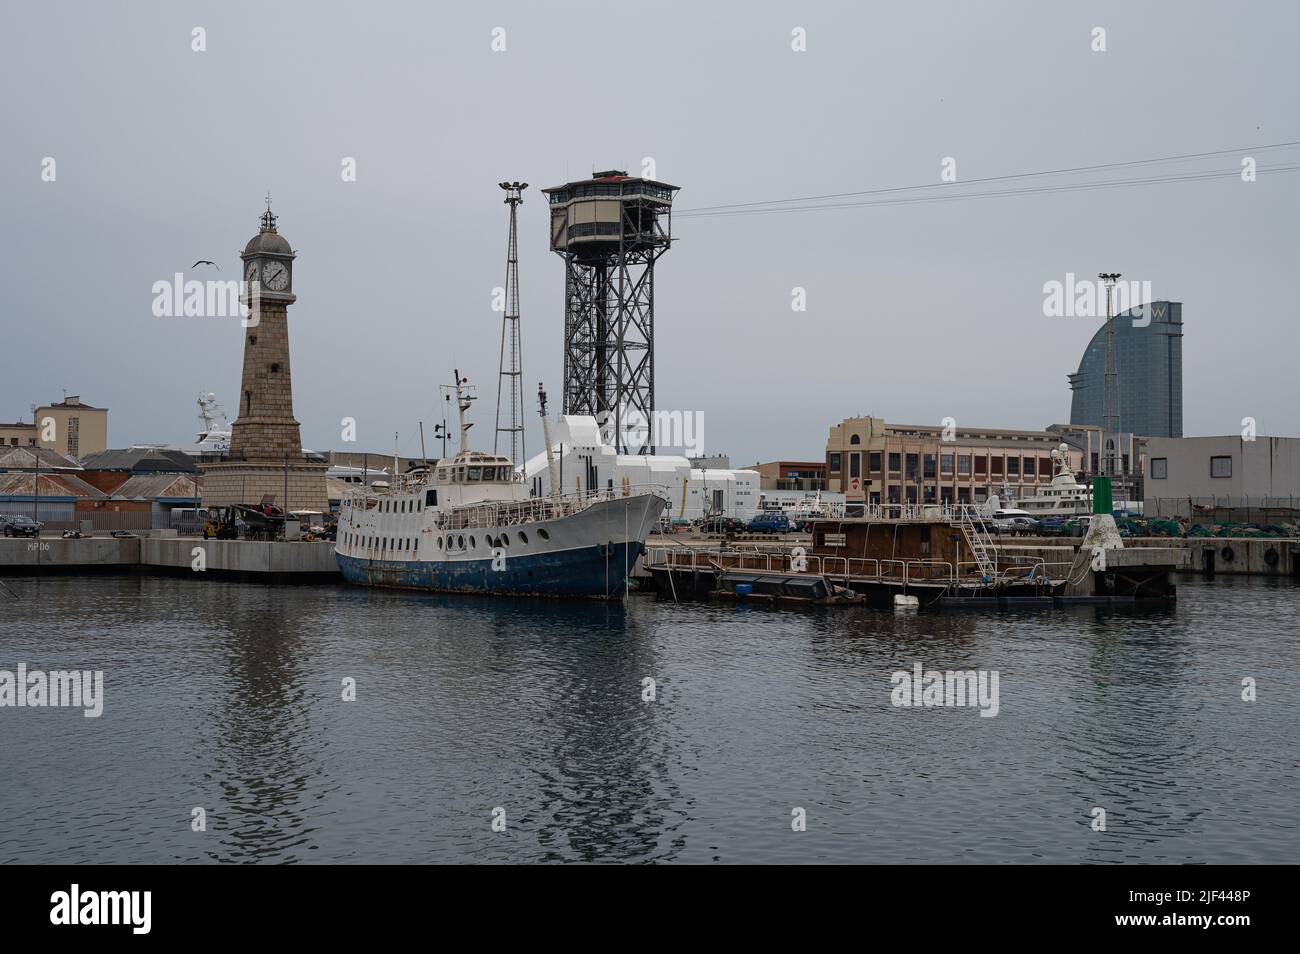 Photograph of the port of Barcelona with old ships, the cable car and the clock tower Stock Photo